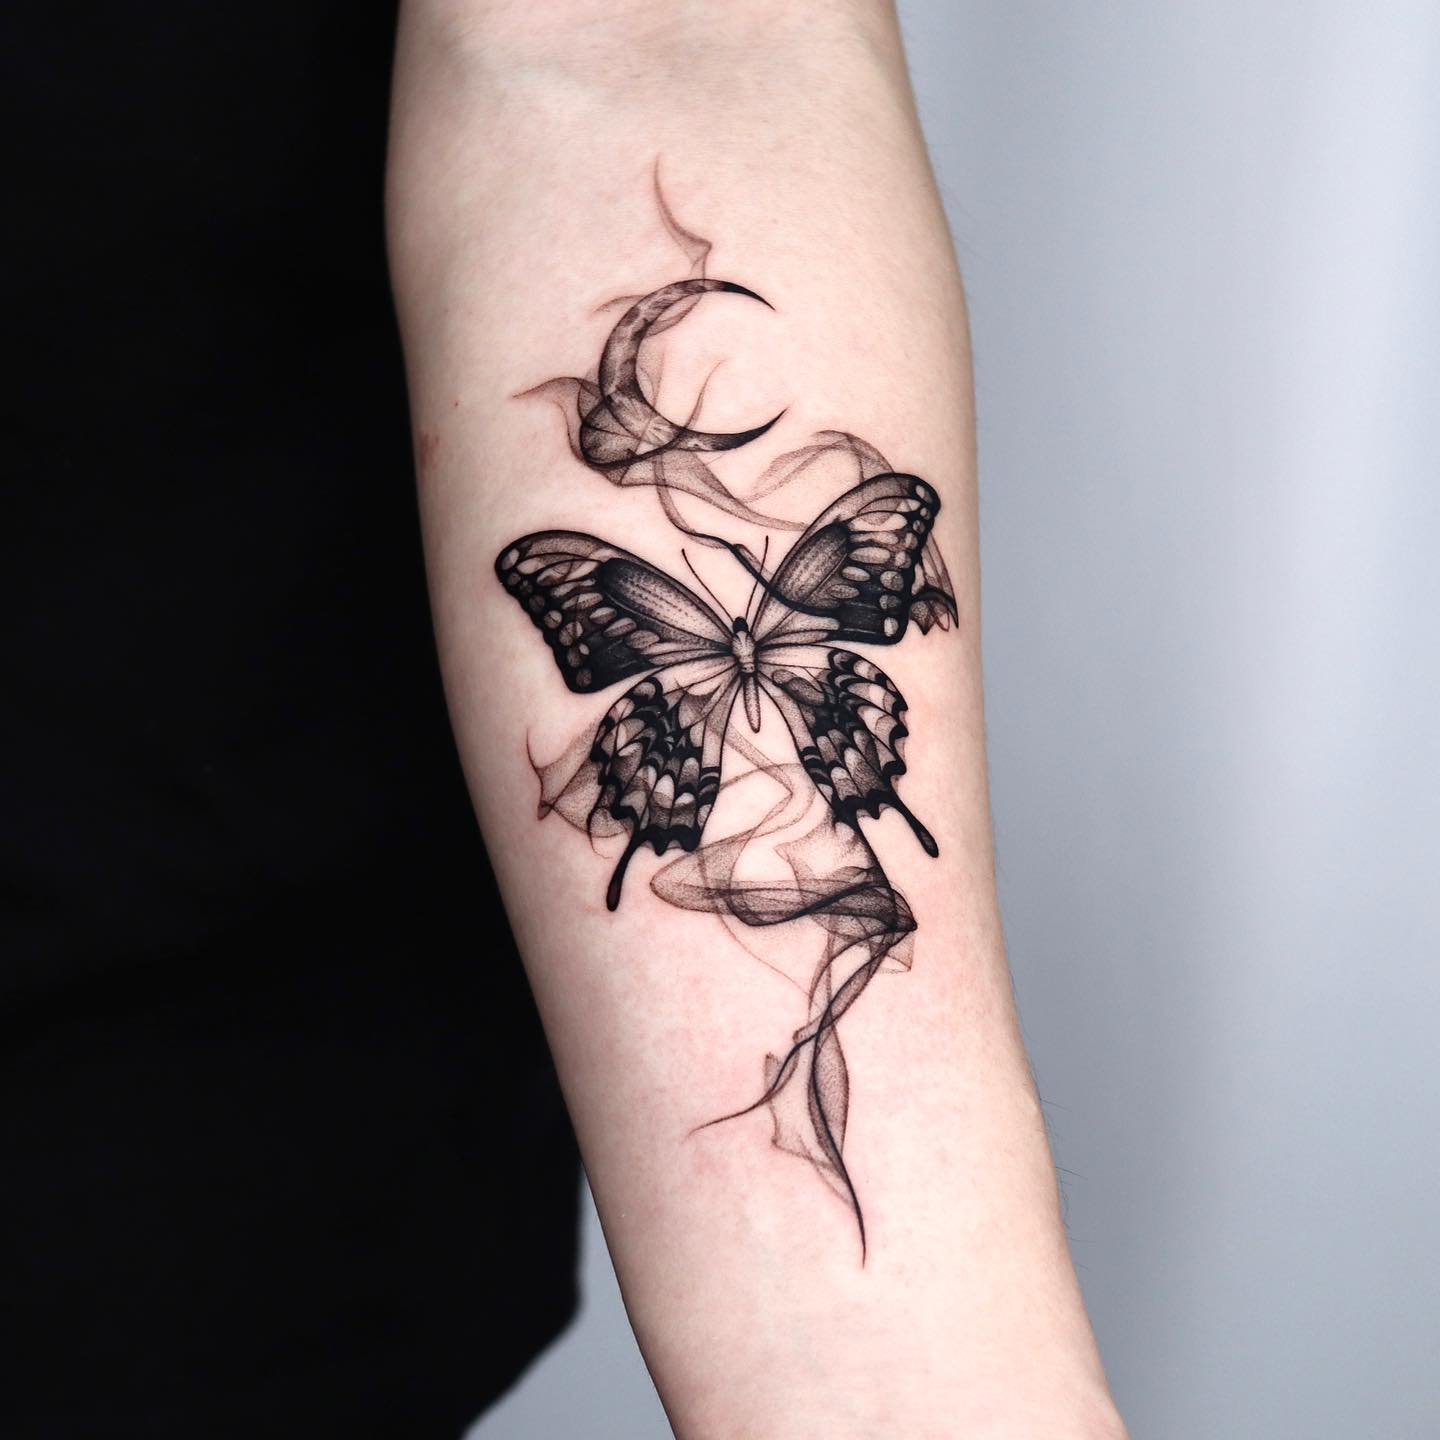 Butterfly tattoo by